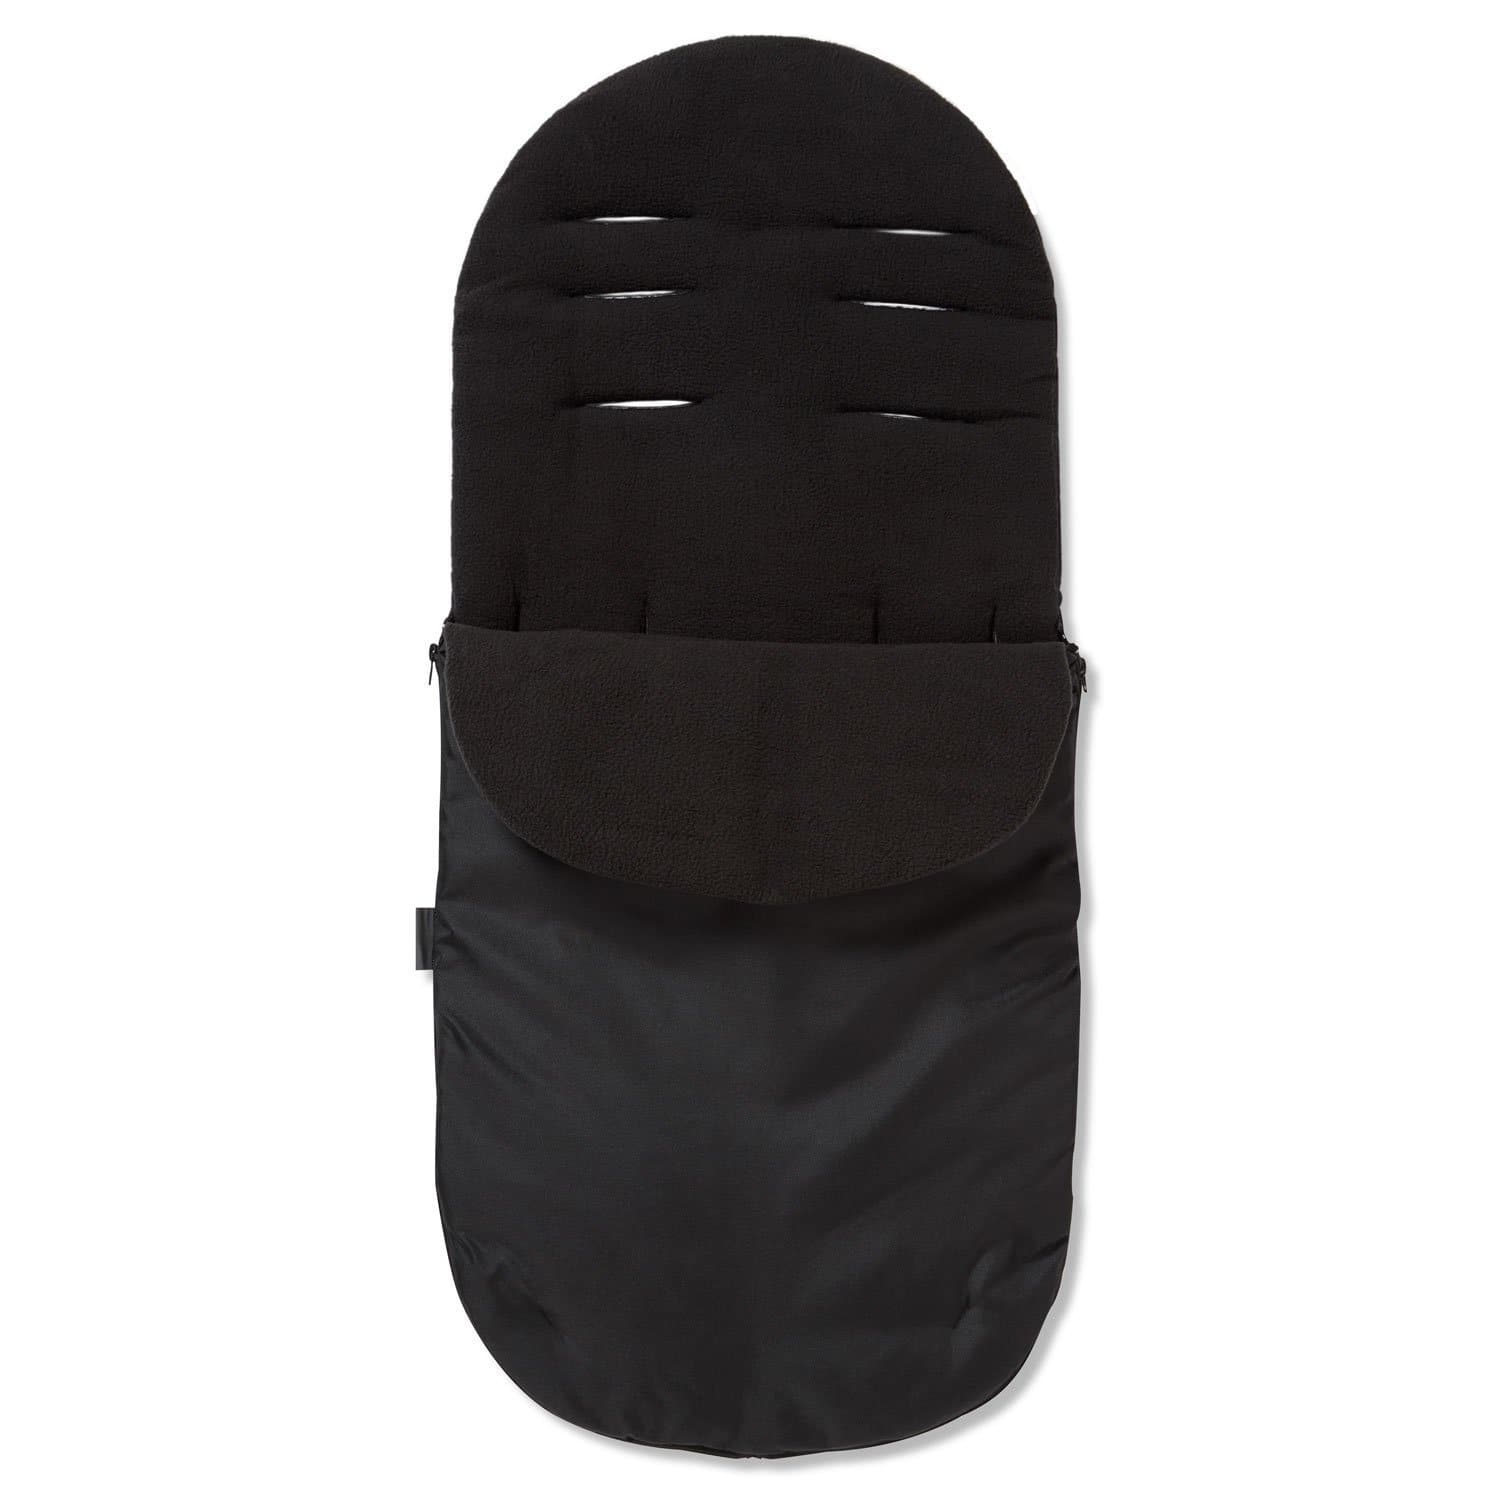 Footmuff / Cosy Toes Compatible with BabiesRus - Black / Fits All Models | For Your Little One